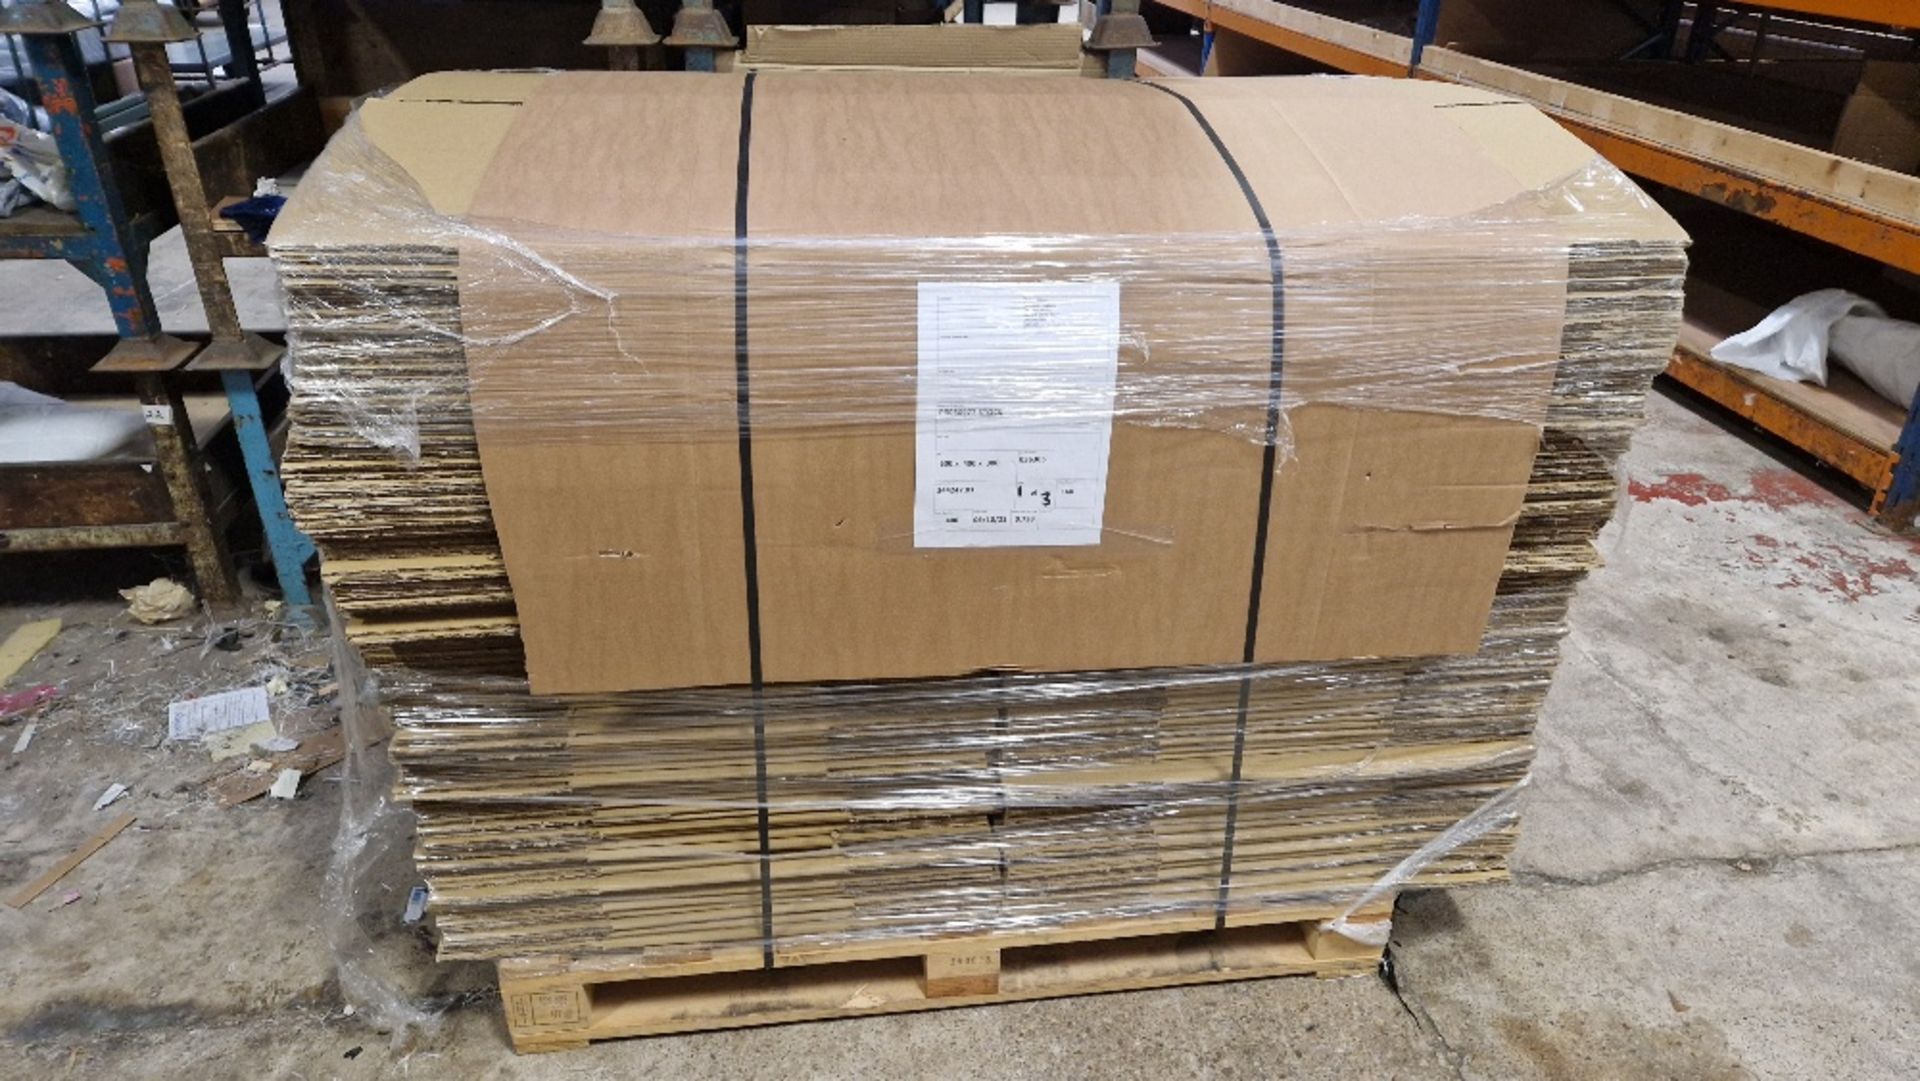 2 PALLETS CONTAINING 320 CORRUGATED CARDBOARD BOXES 600MM X 400MM X 300MM *** PLEASE NOTE: ASSETS